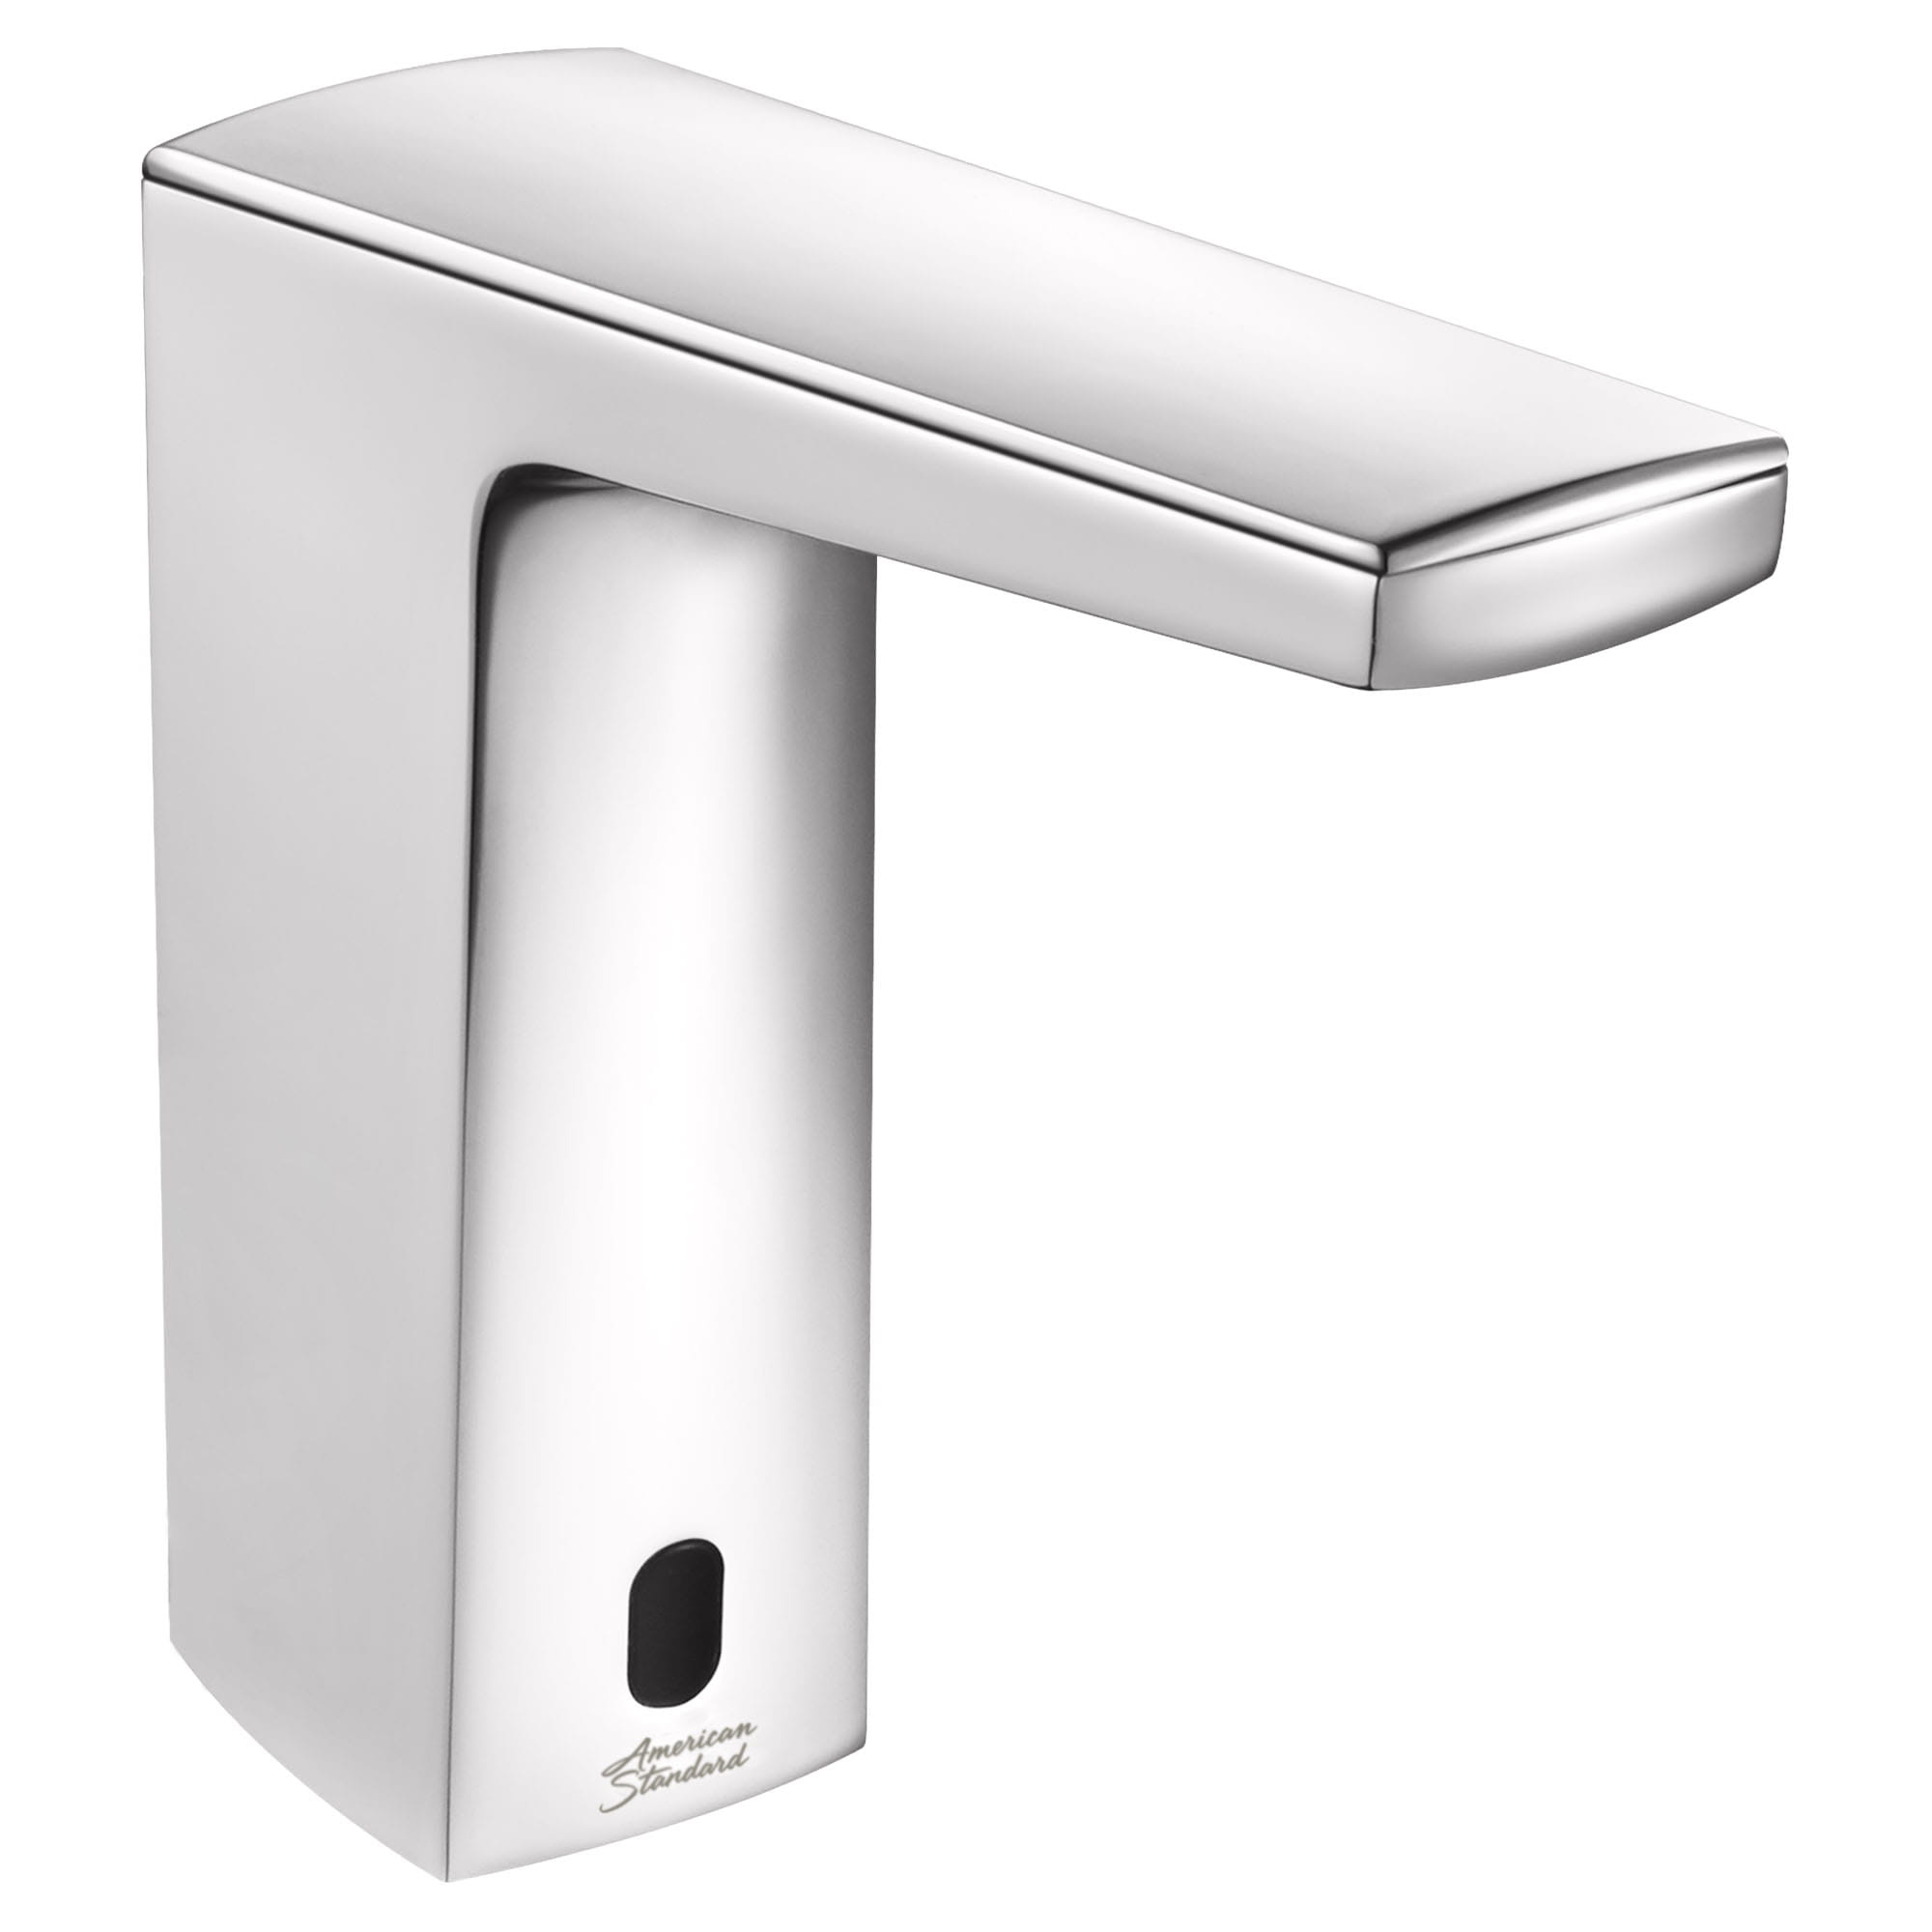 Paradigm® Selectronic® Touchless Faucet, Base Model With Above-Deck Mixing, 1.5 gpm/5.7 Lpm